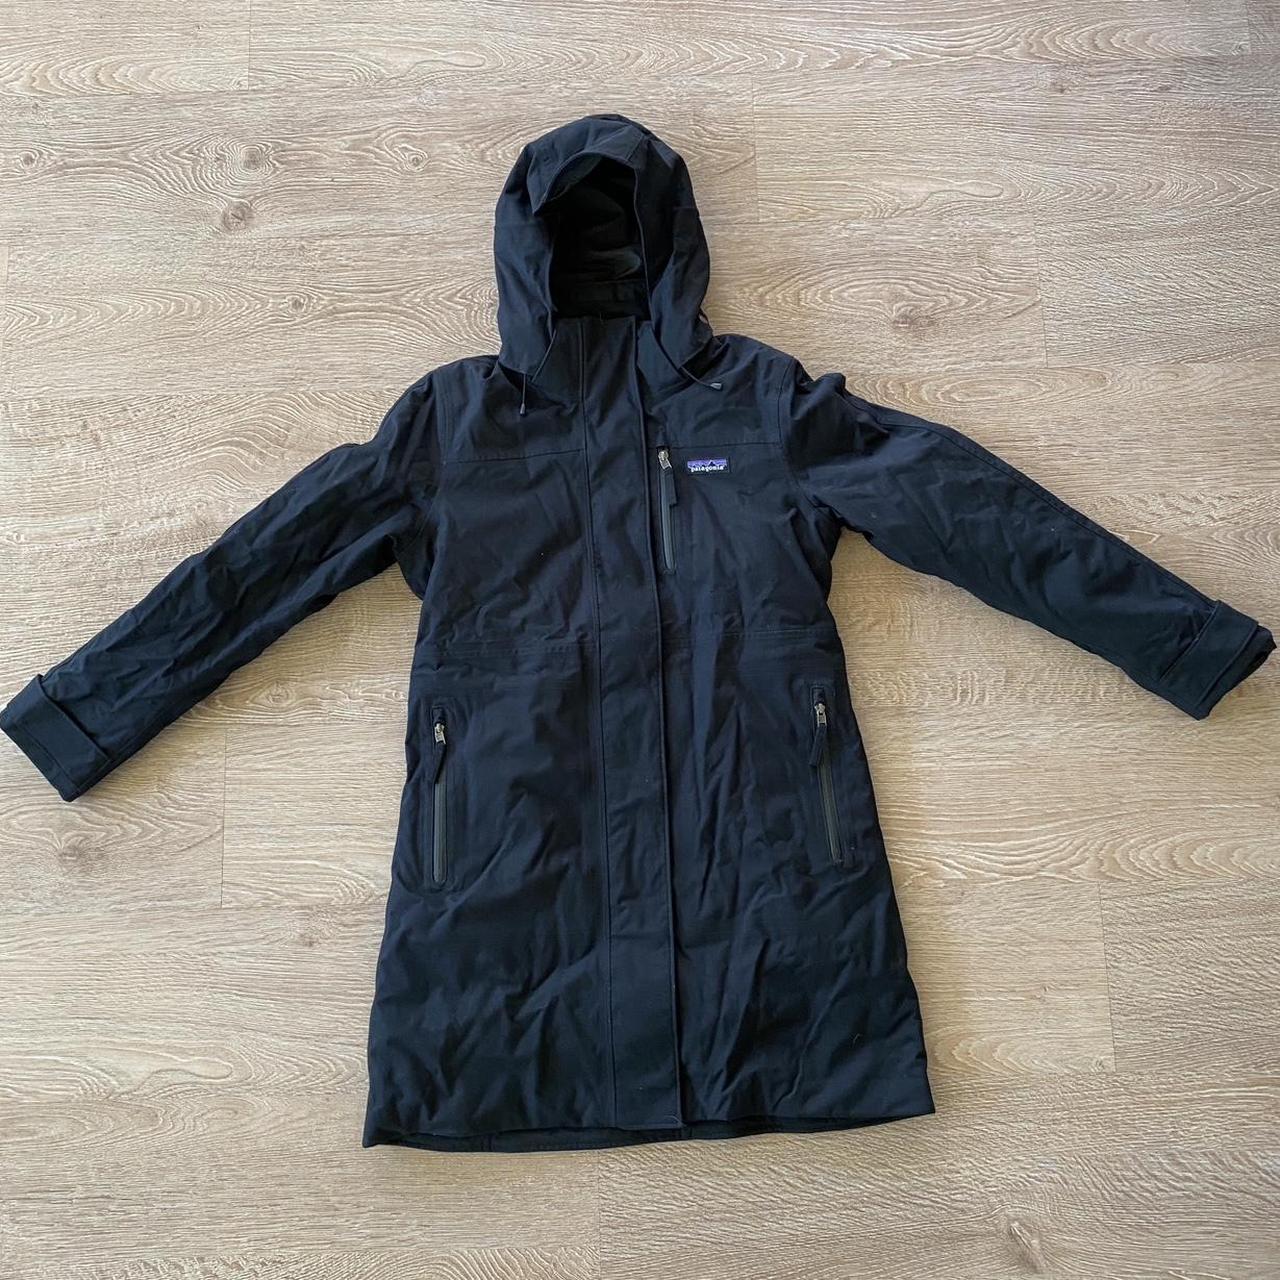 Patagonia Women’s Down Parka - Size S. Jacket has a... - Depop